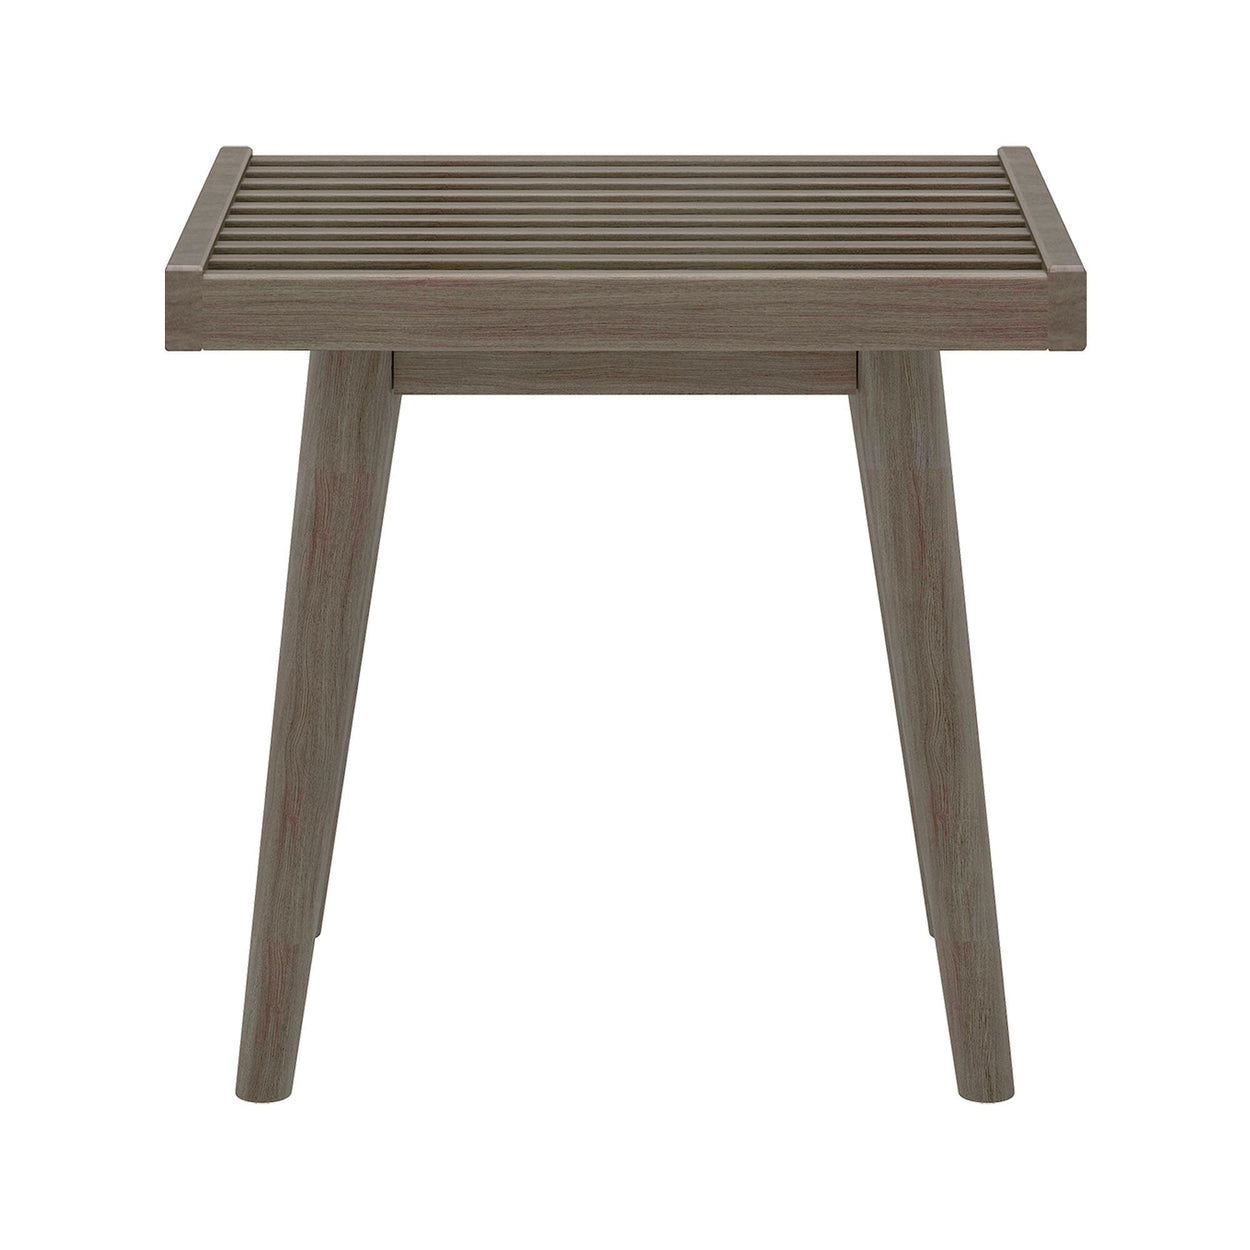 184300-151 : Accessories Mid-Century Modern Single Bench, Clay